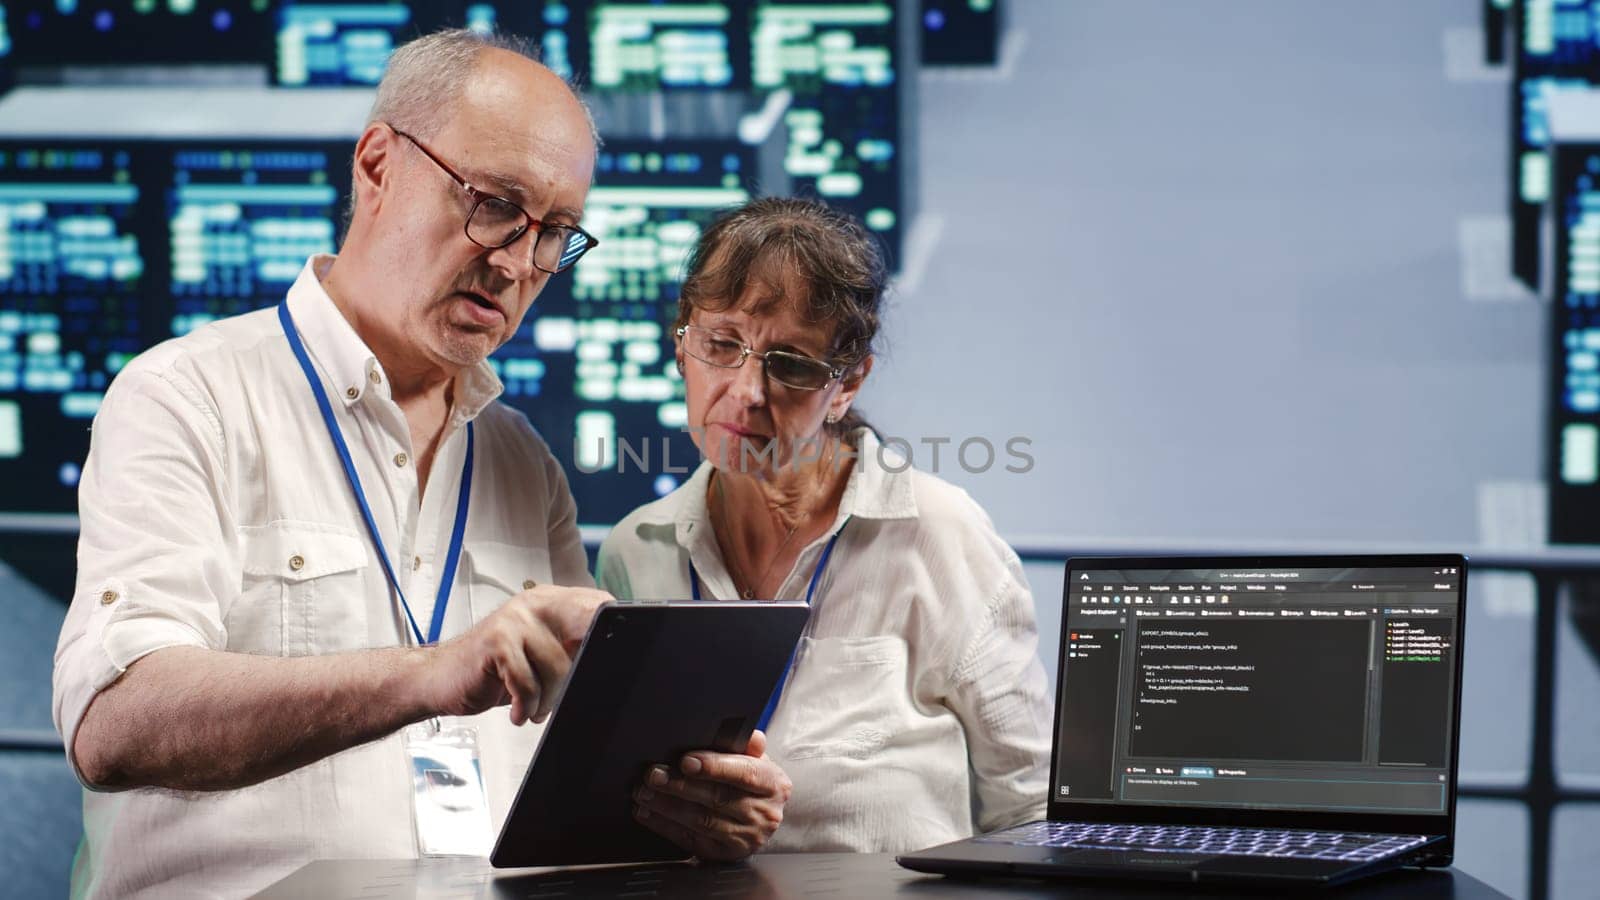 Data storage company executives solving tasks on tablet while running scripts on laptop terminal. Proficient tech support workers amidst servers, accessing databases and manipulating lines of code